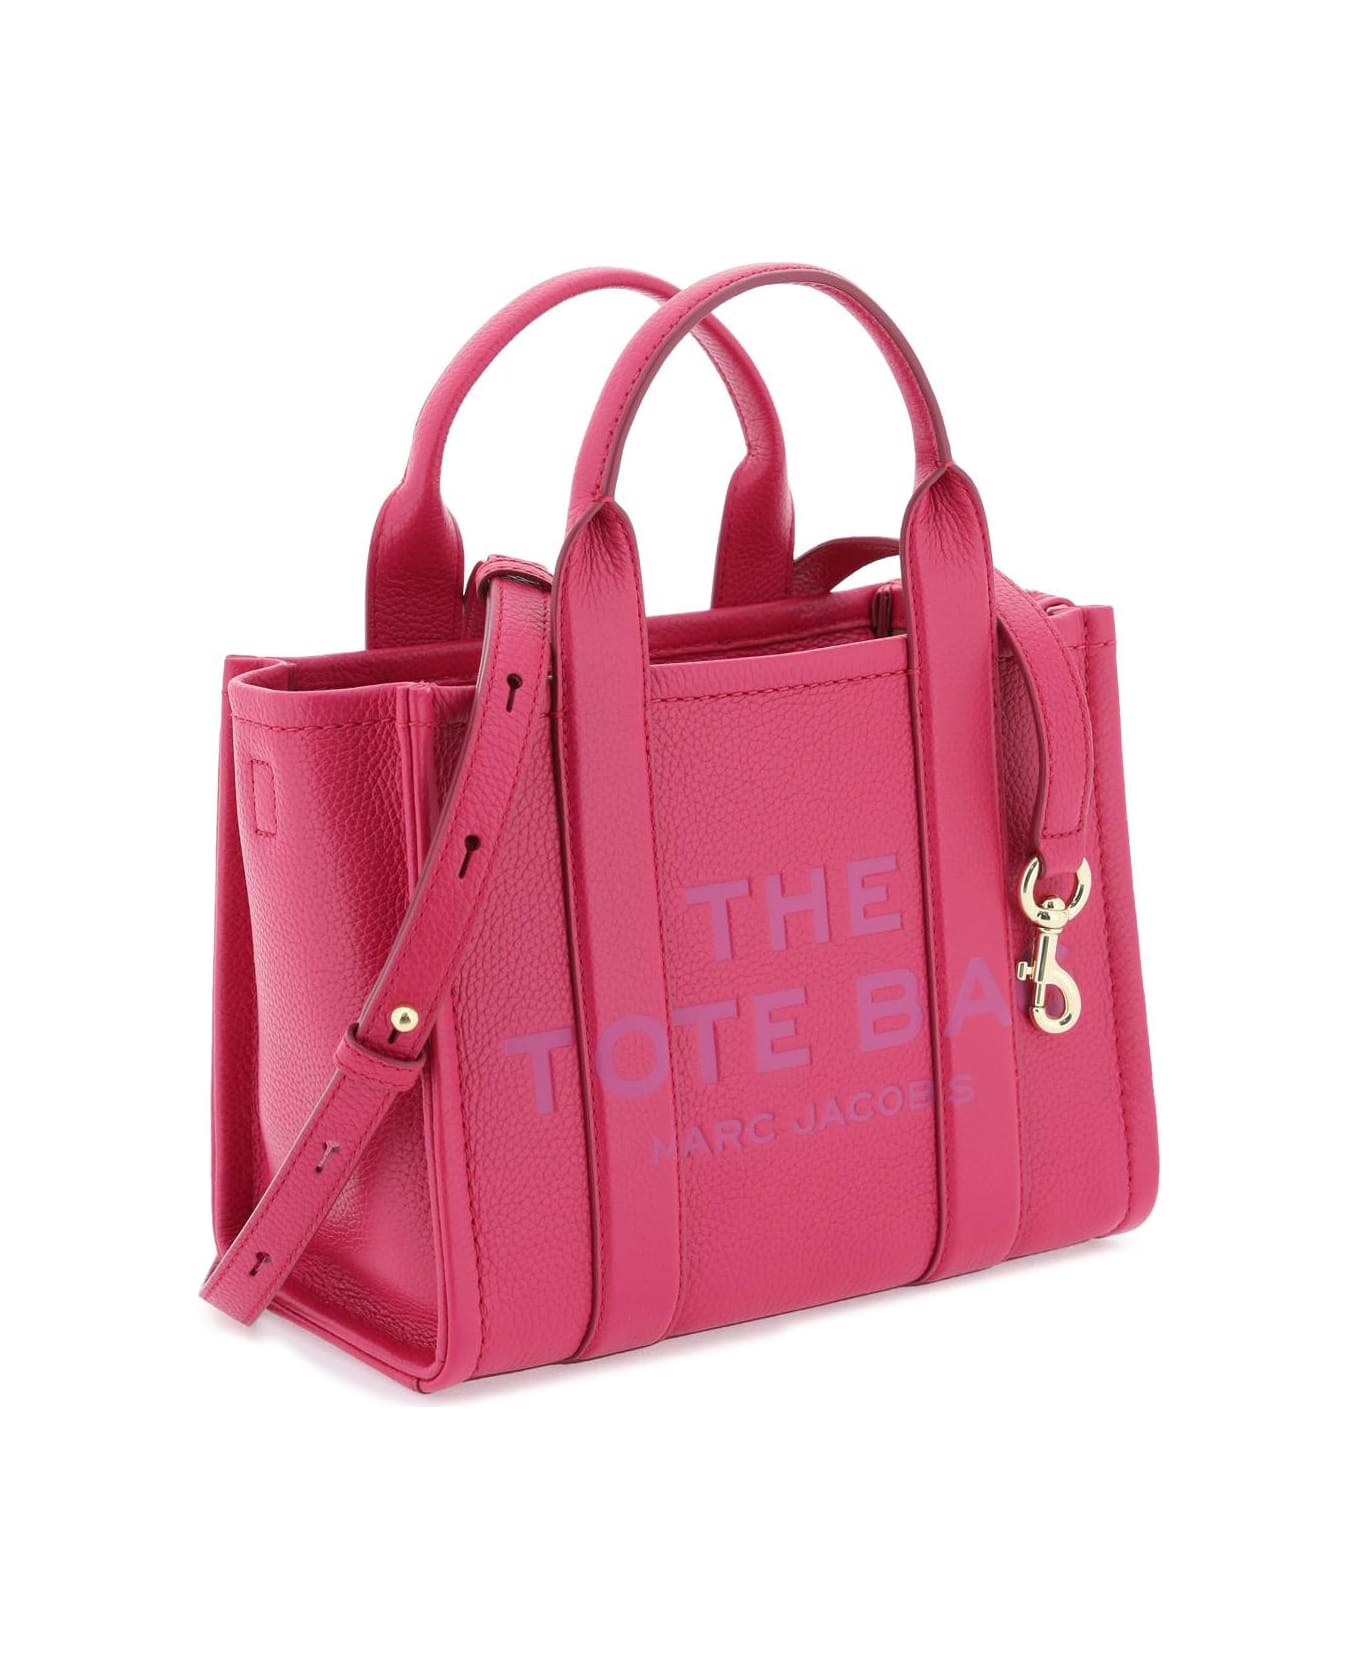 Marc Jacobs The Leather Small Tote Bag - Violet トートバッグ